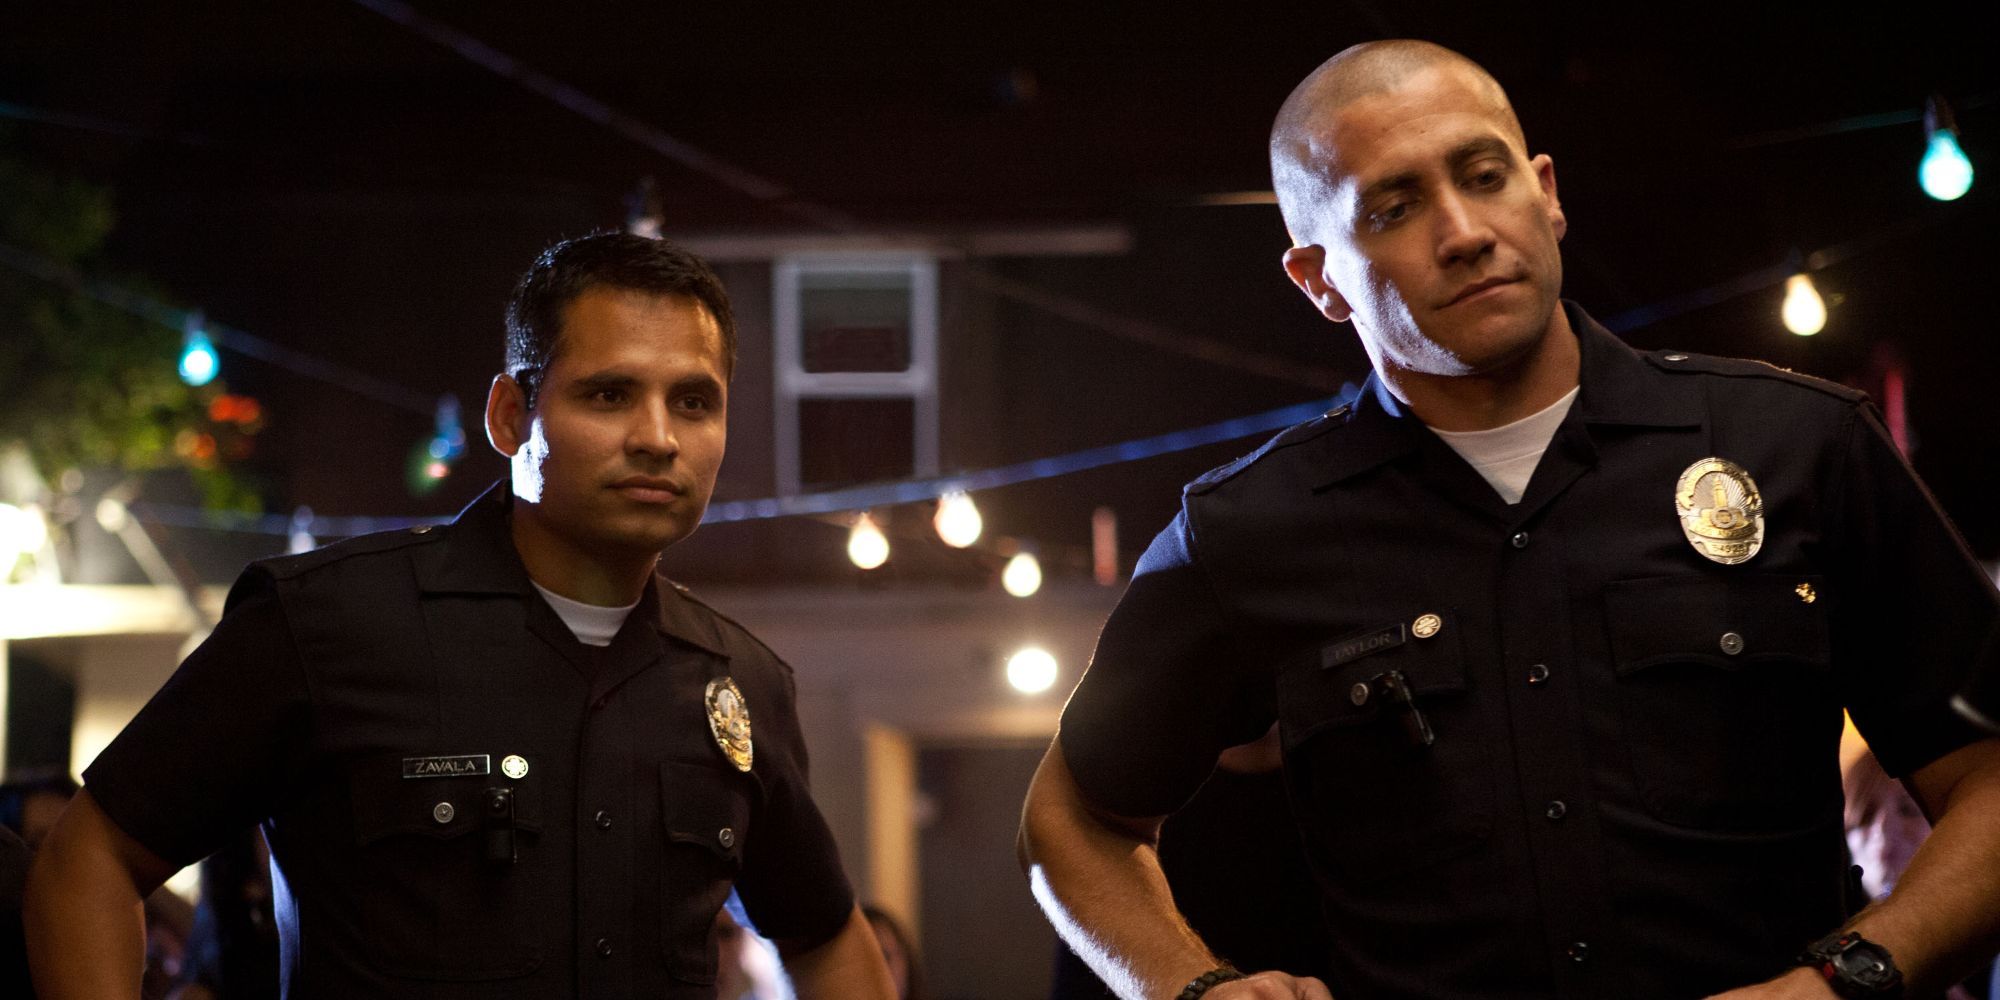 Michael Peña and Jake Gyllenhaal as Mike and Brian looking in the same direction End of Watch